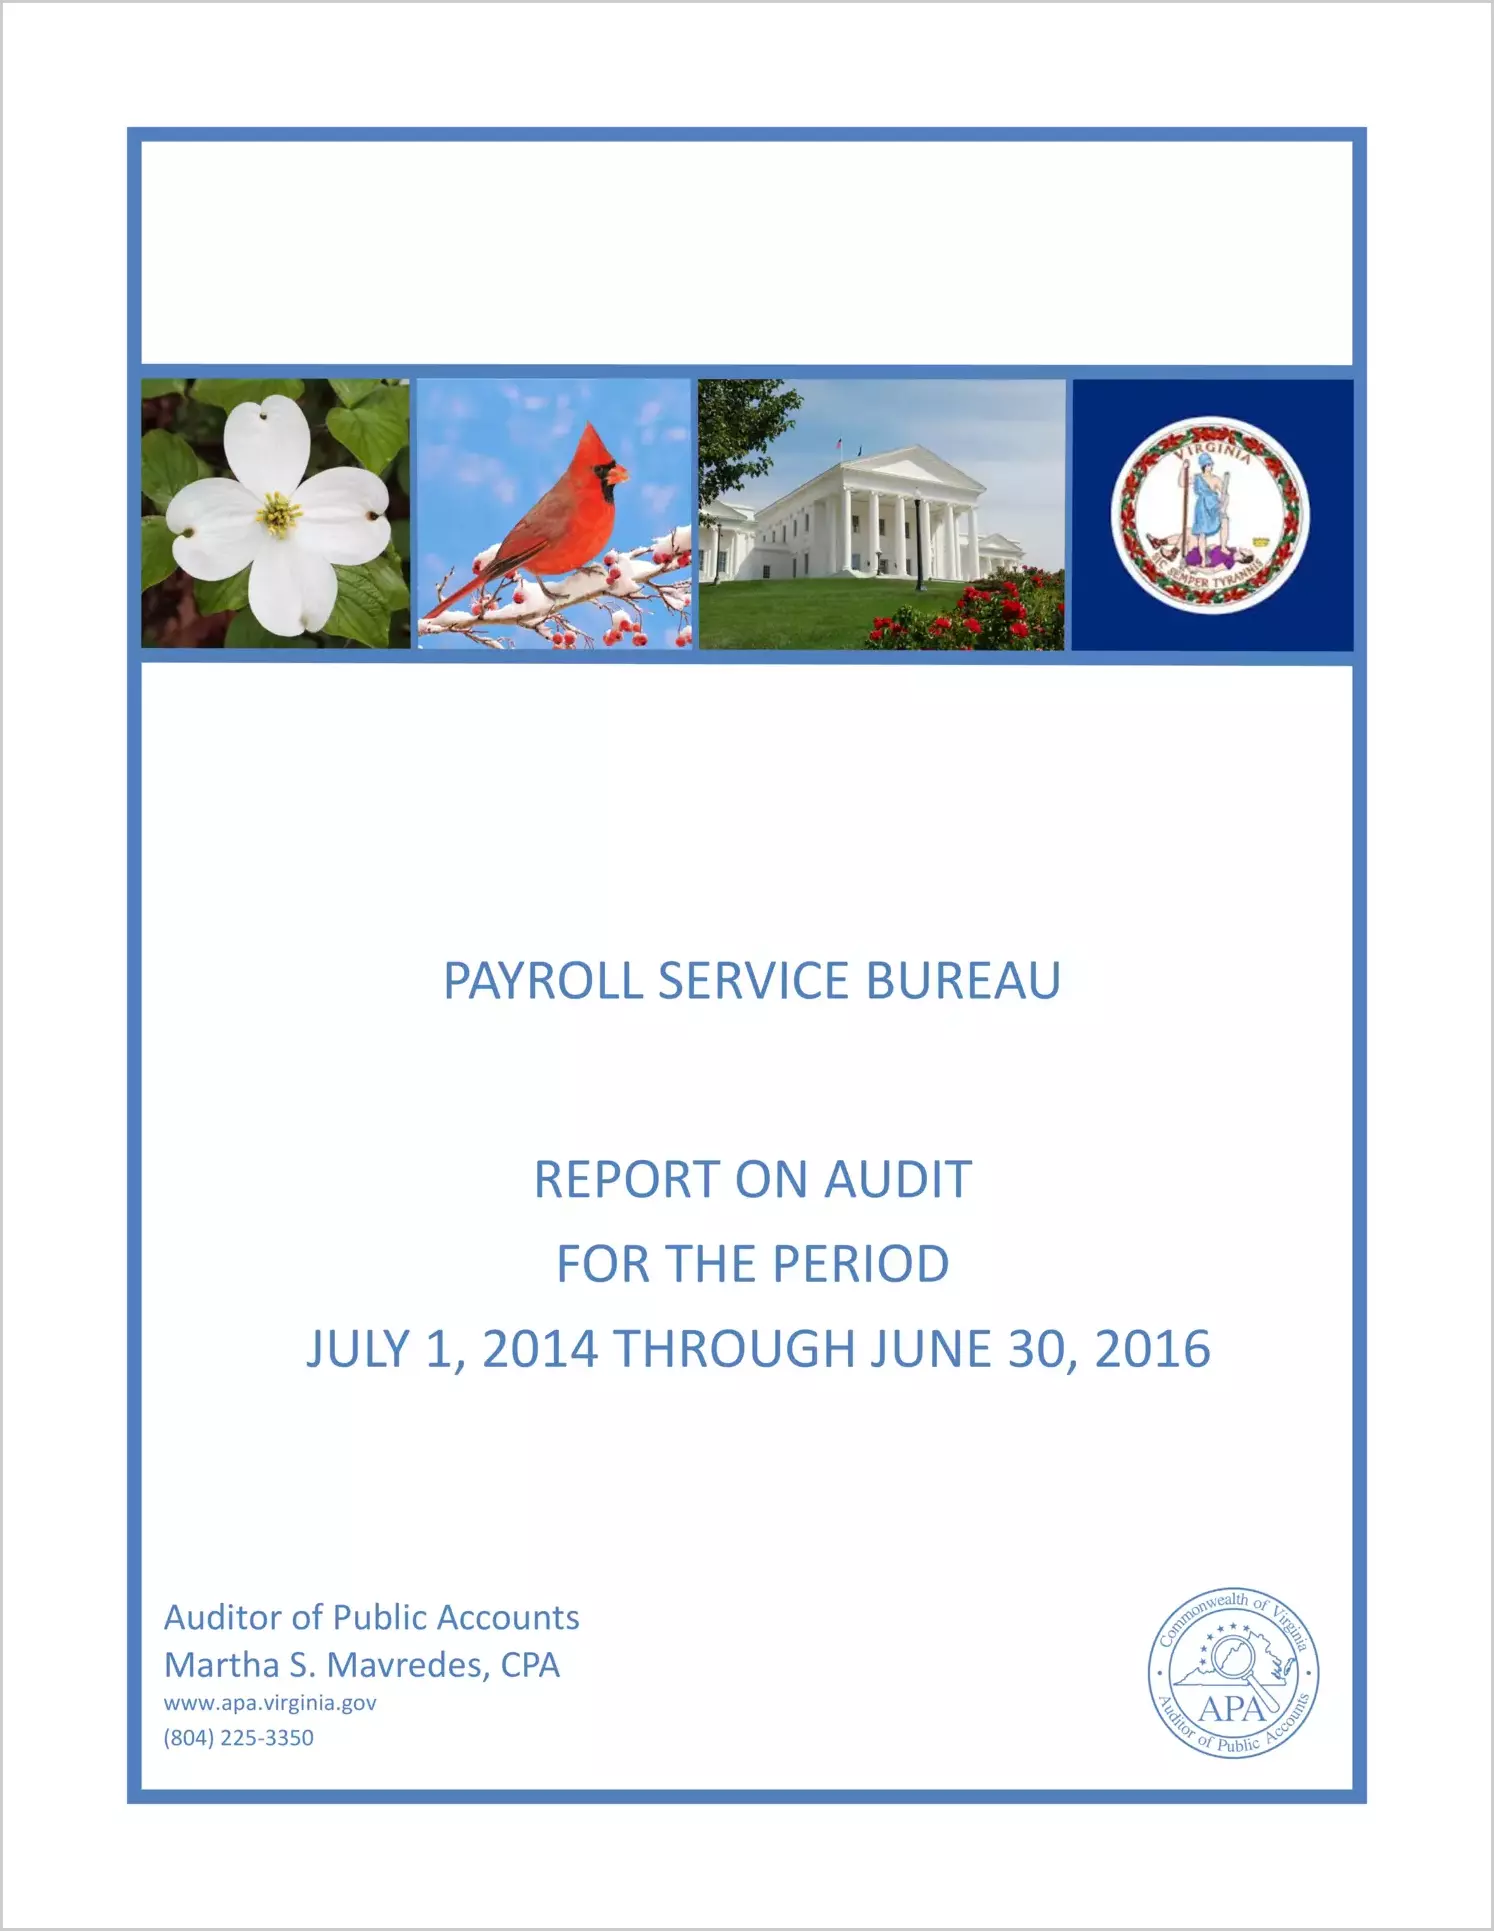 Payroll Service Bureau for the period July 1, 2014 through June 30, 2016